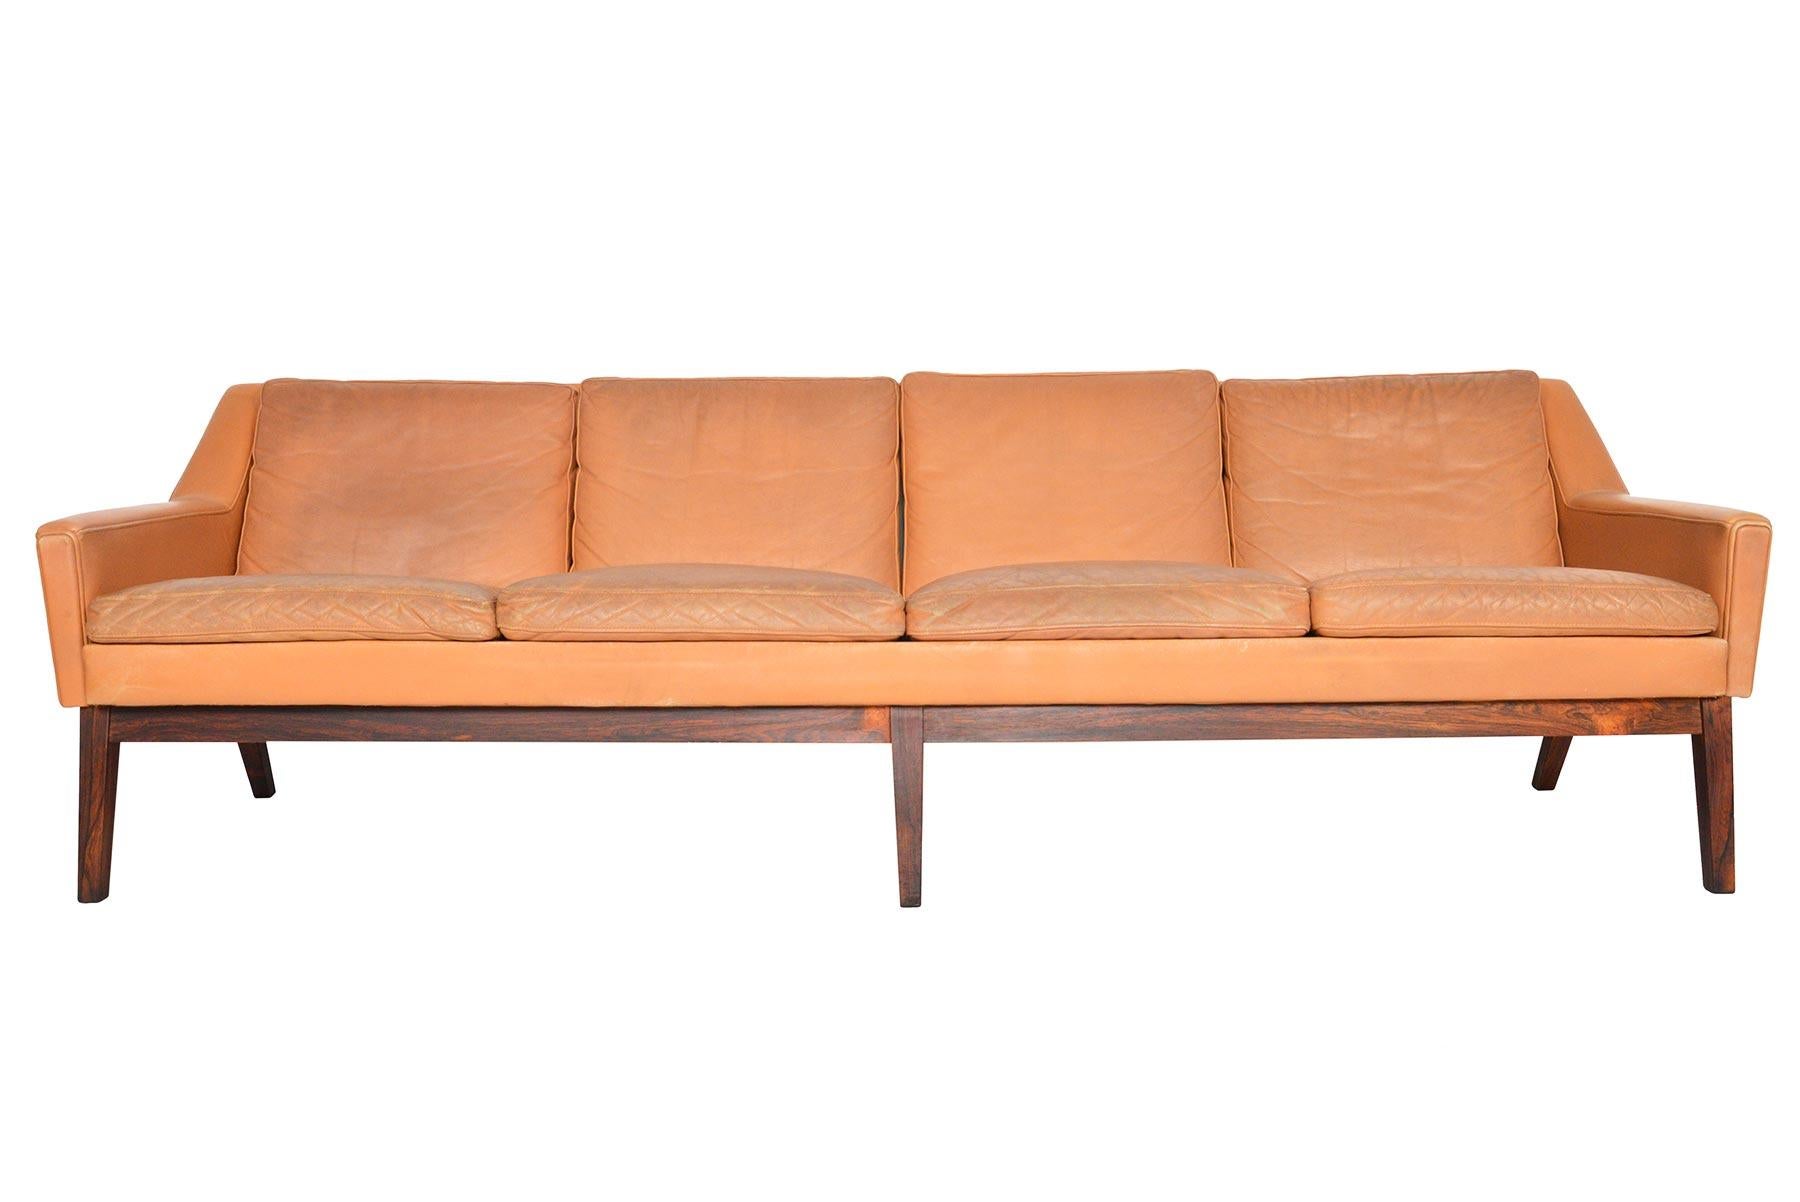 This Danish modern midcentury four seat sofa in patinated sepia leather is a staple of modern decor. Covered in original leather and raised on gorgeous tapered rosewood base, this sofa is upholstered on all sides and can be floated in the centre of